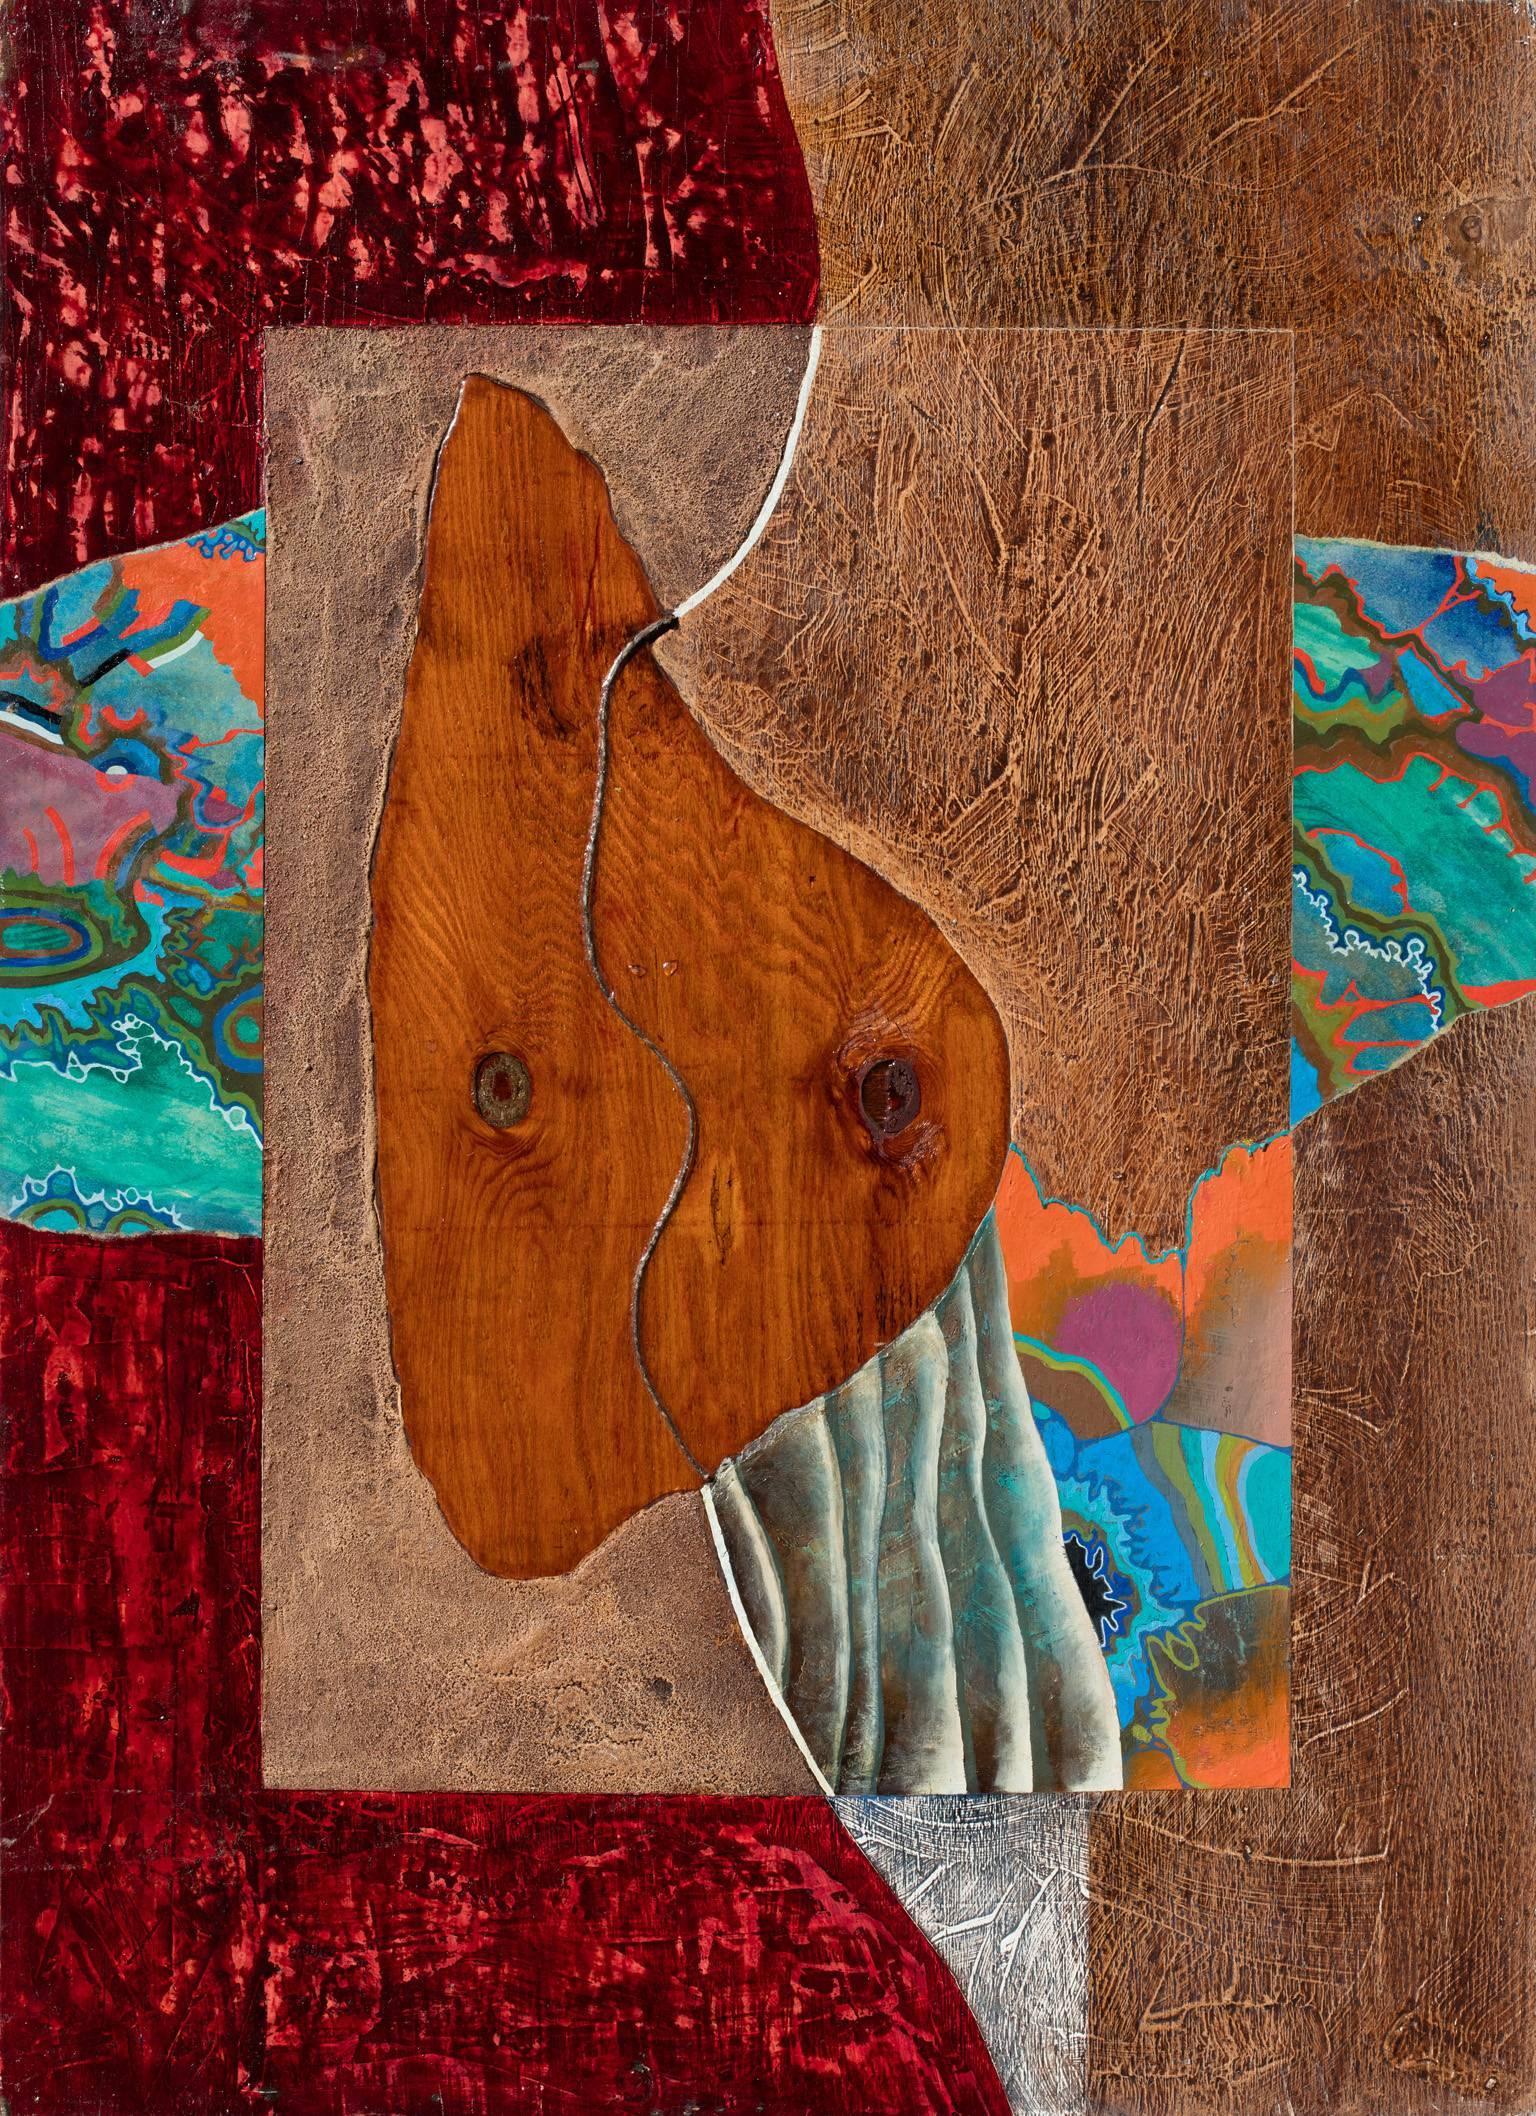 Gian Berto Vanni Abstract Painting - History of Textures - Wood Inlaying Painting with Oil Paint Abstraction